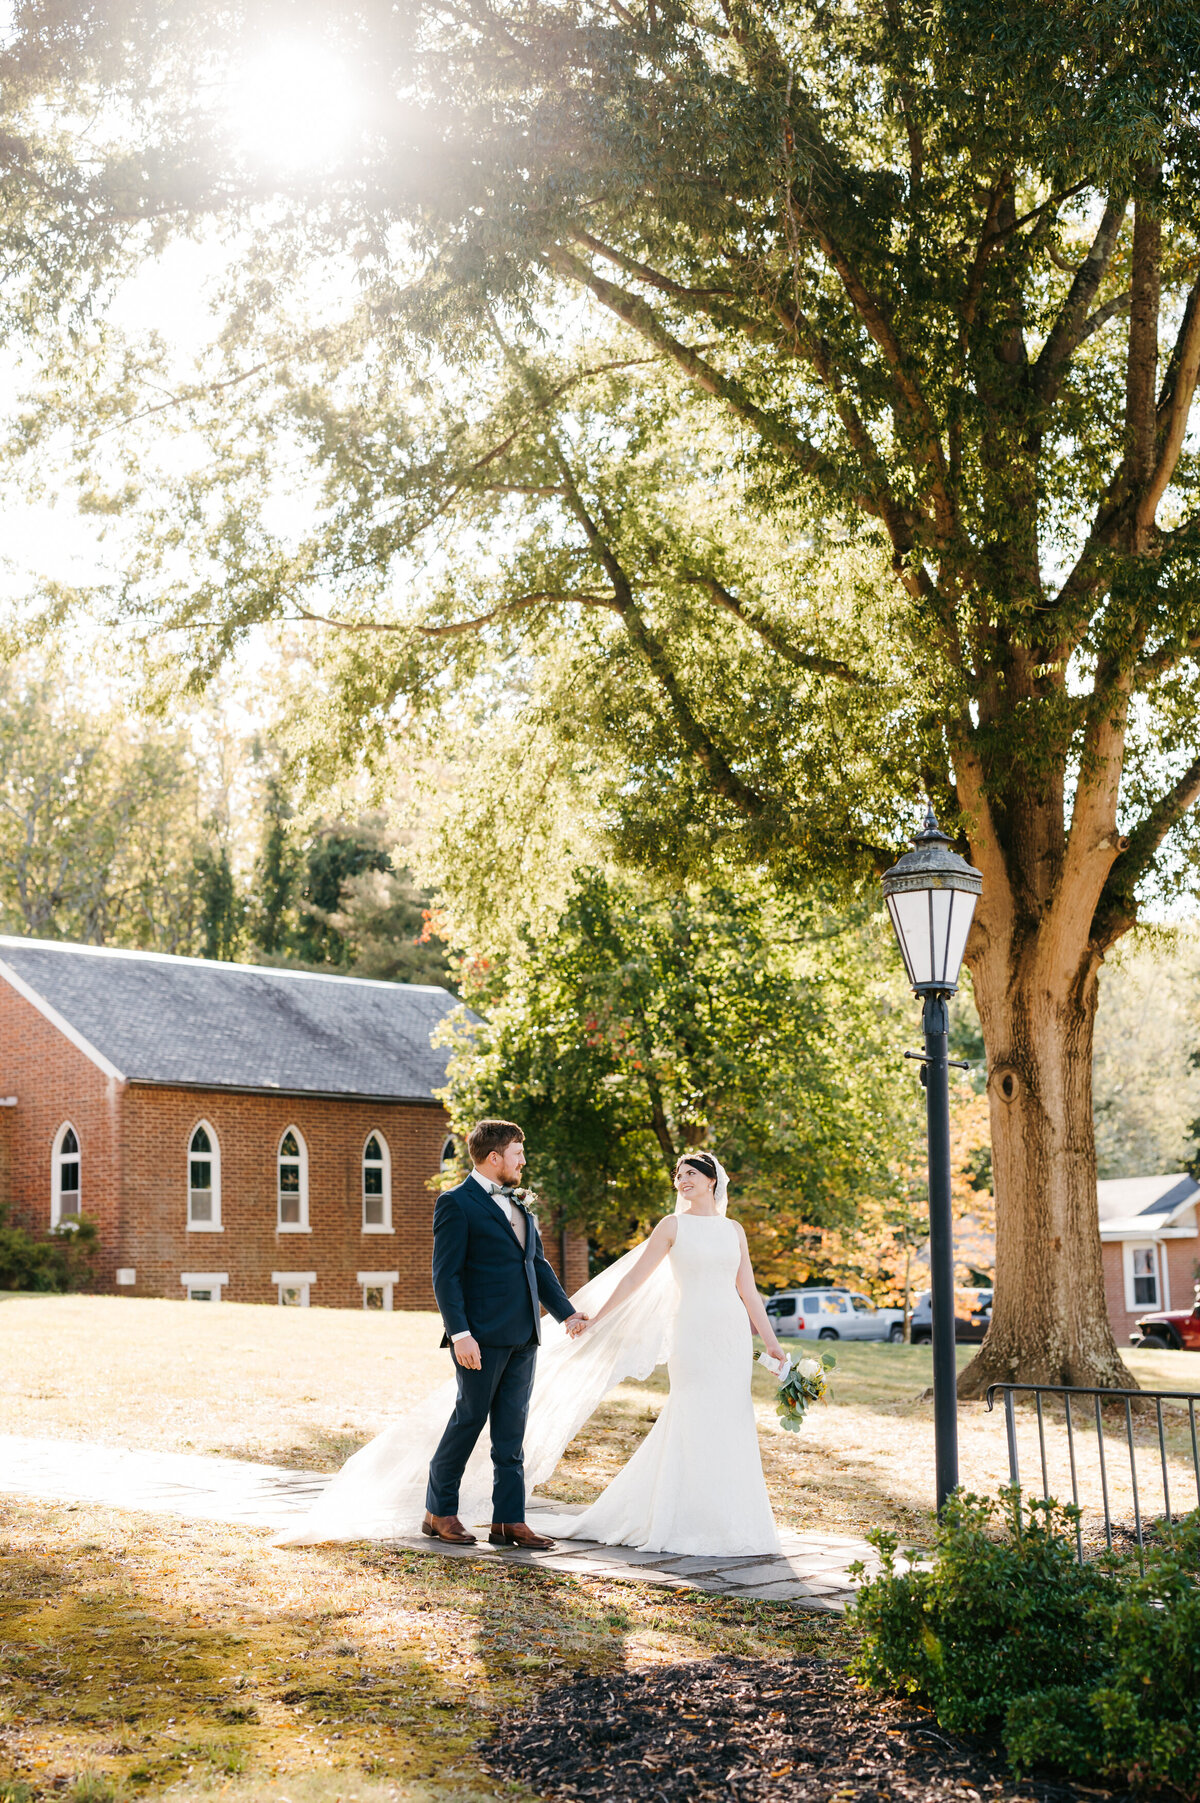 Richmond wedding photographer captures bride and groom exiting their chapel wedding while holding hands and smiling to one another as the sun shines down through the trees